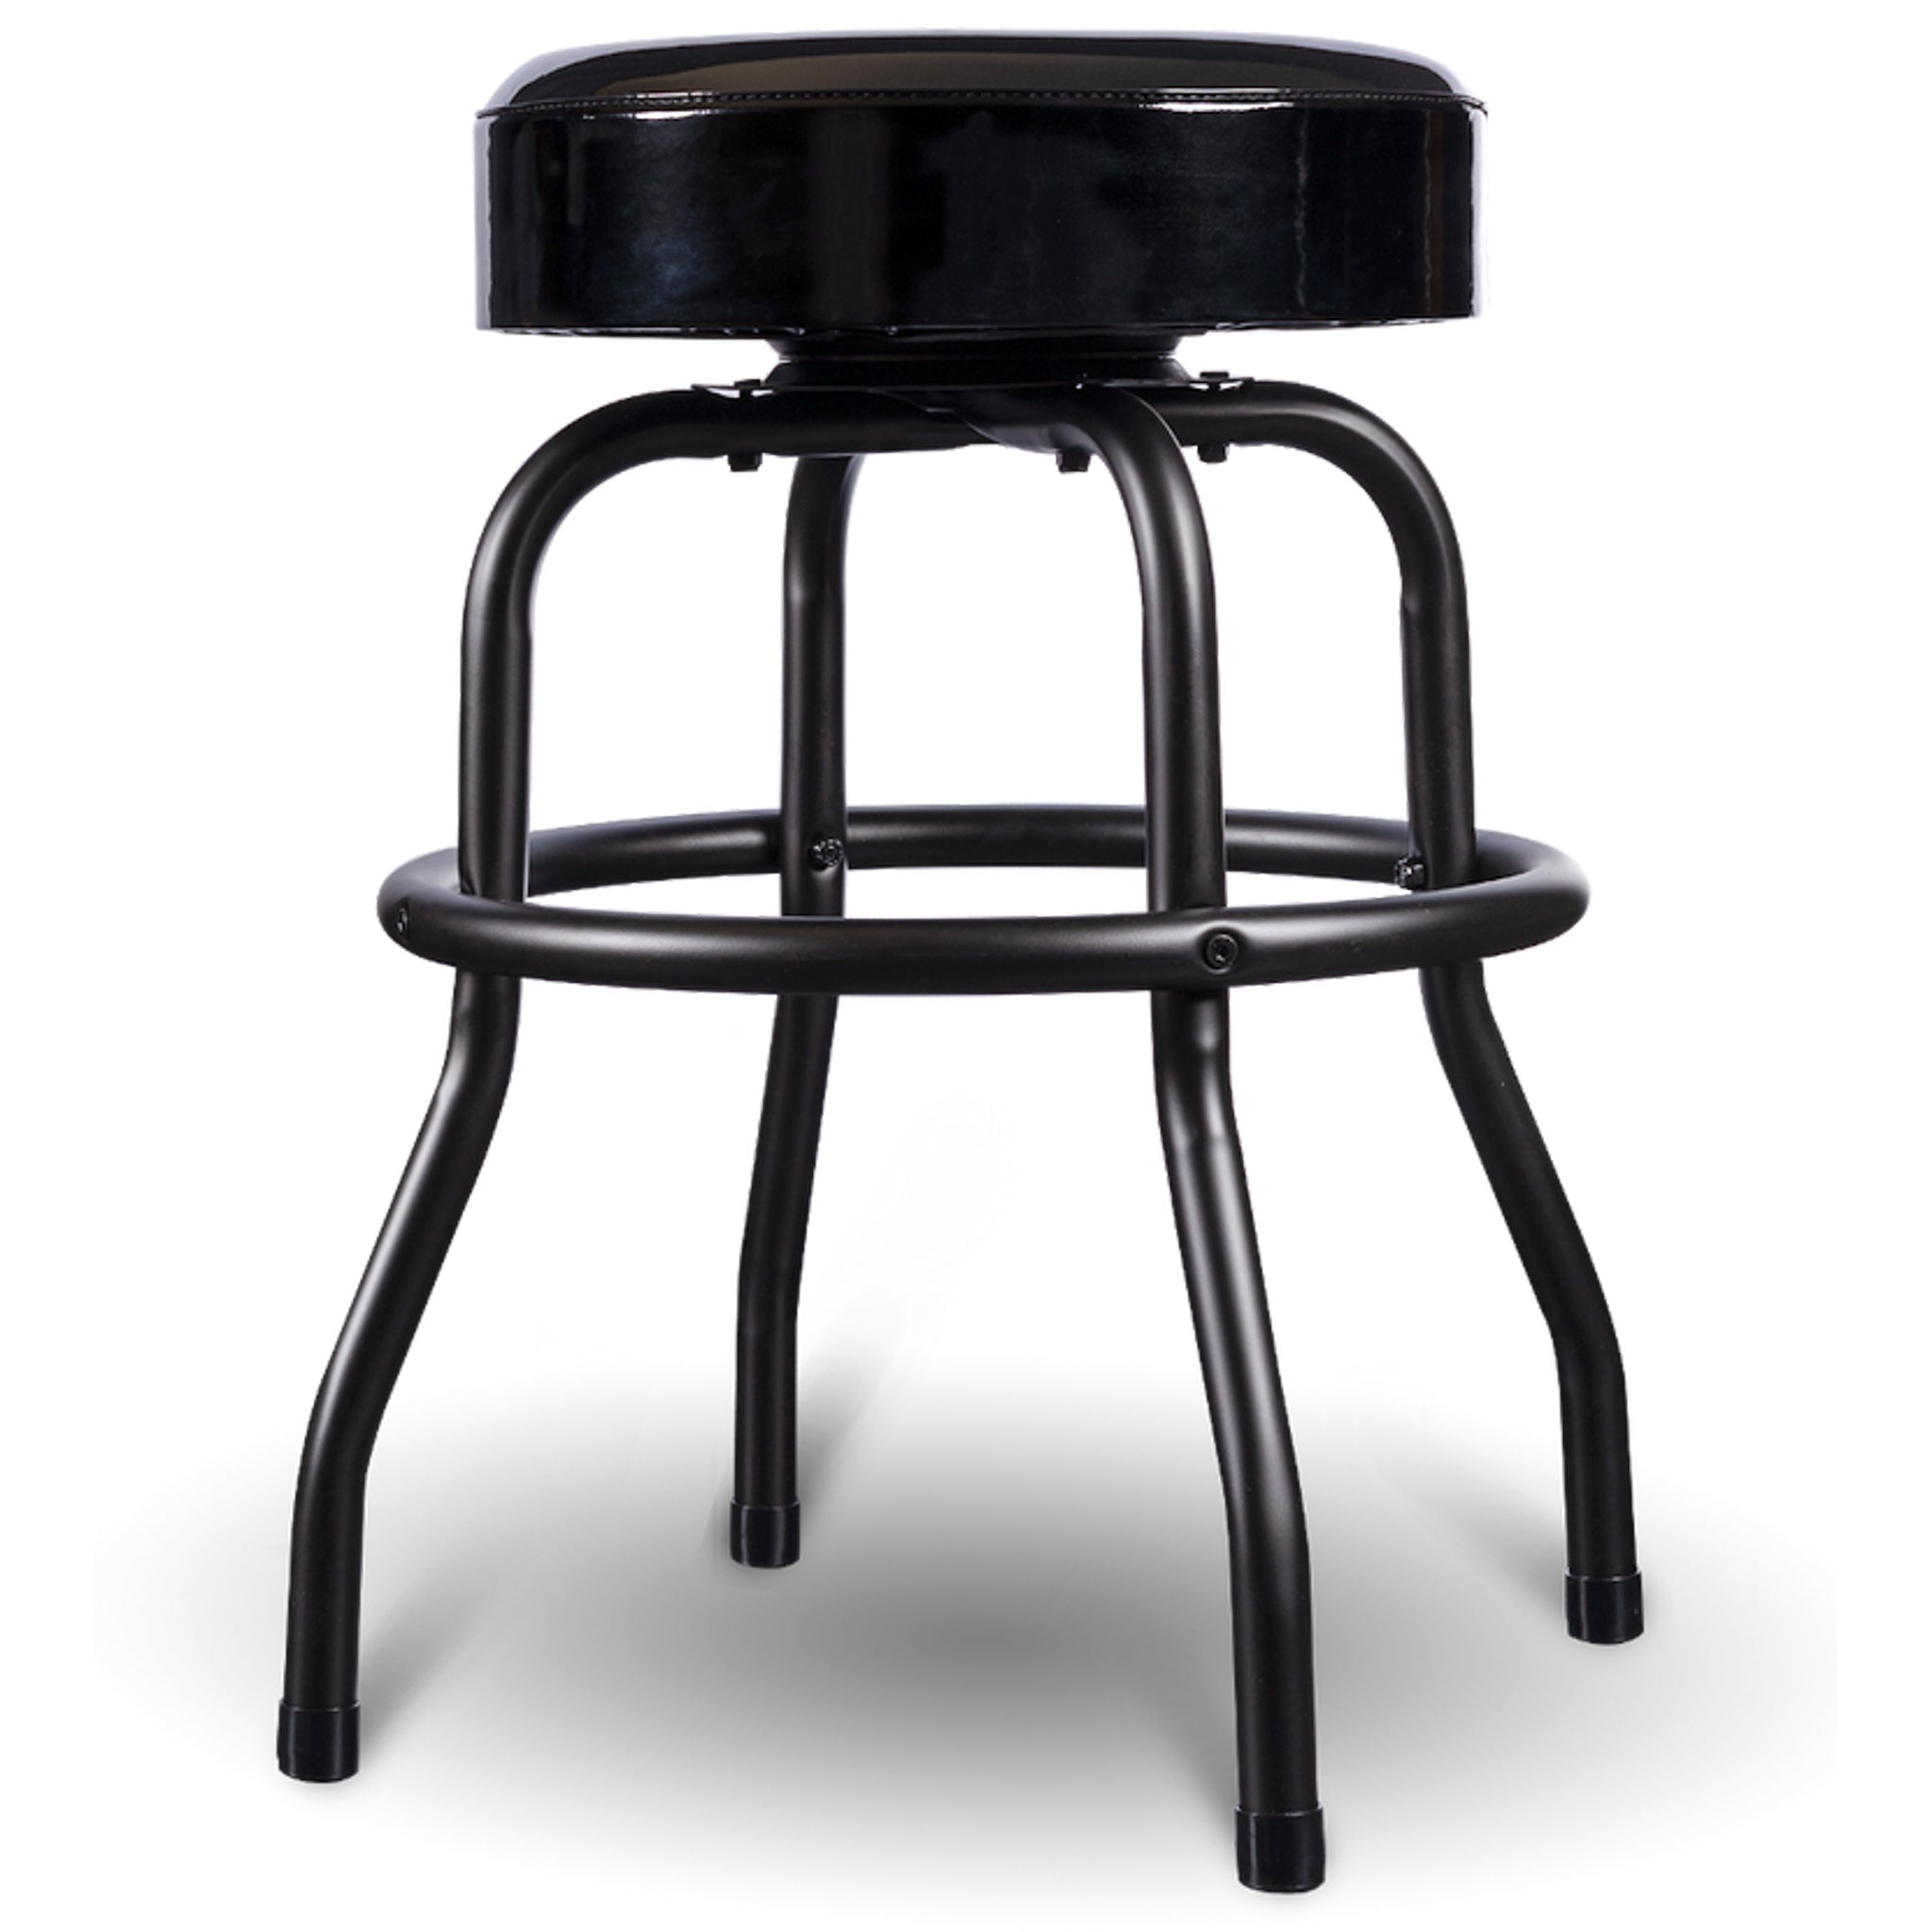 Ampeg Bar Stool with Padded Seat and Metal Legs Black